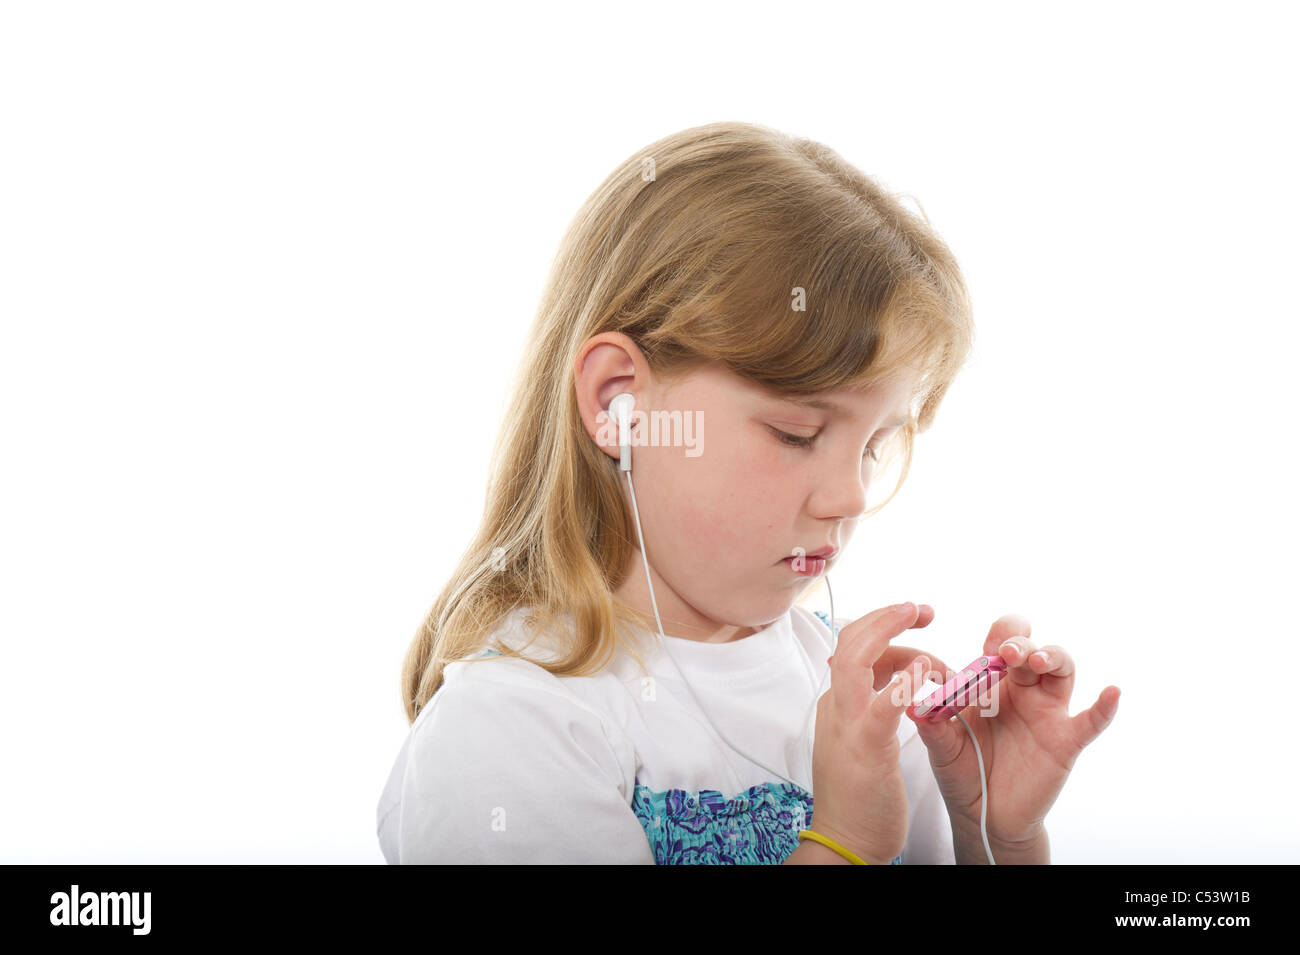 A young girl wearing ear buds listening to an MP3 (ipod Nano) shot against a plain white background. Stock Photo